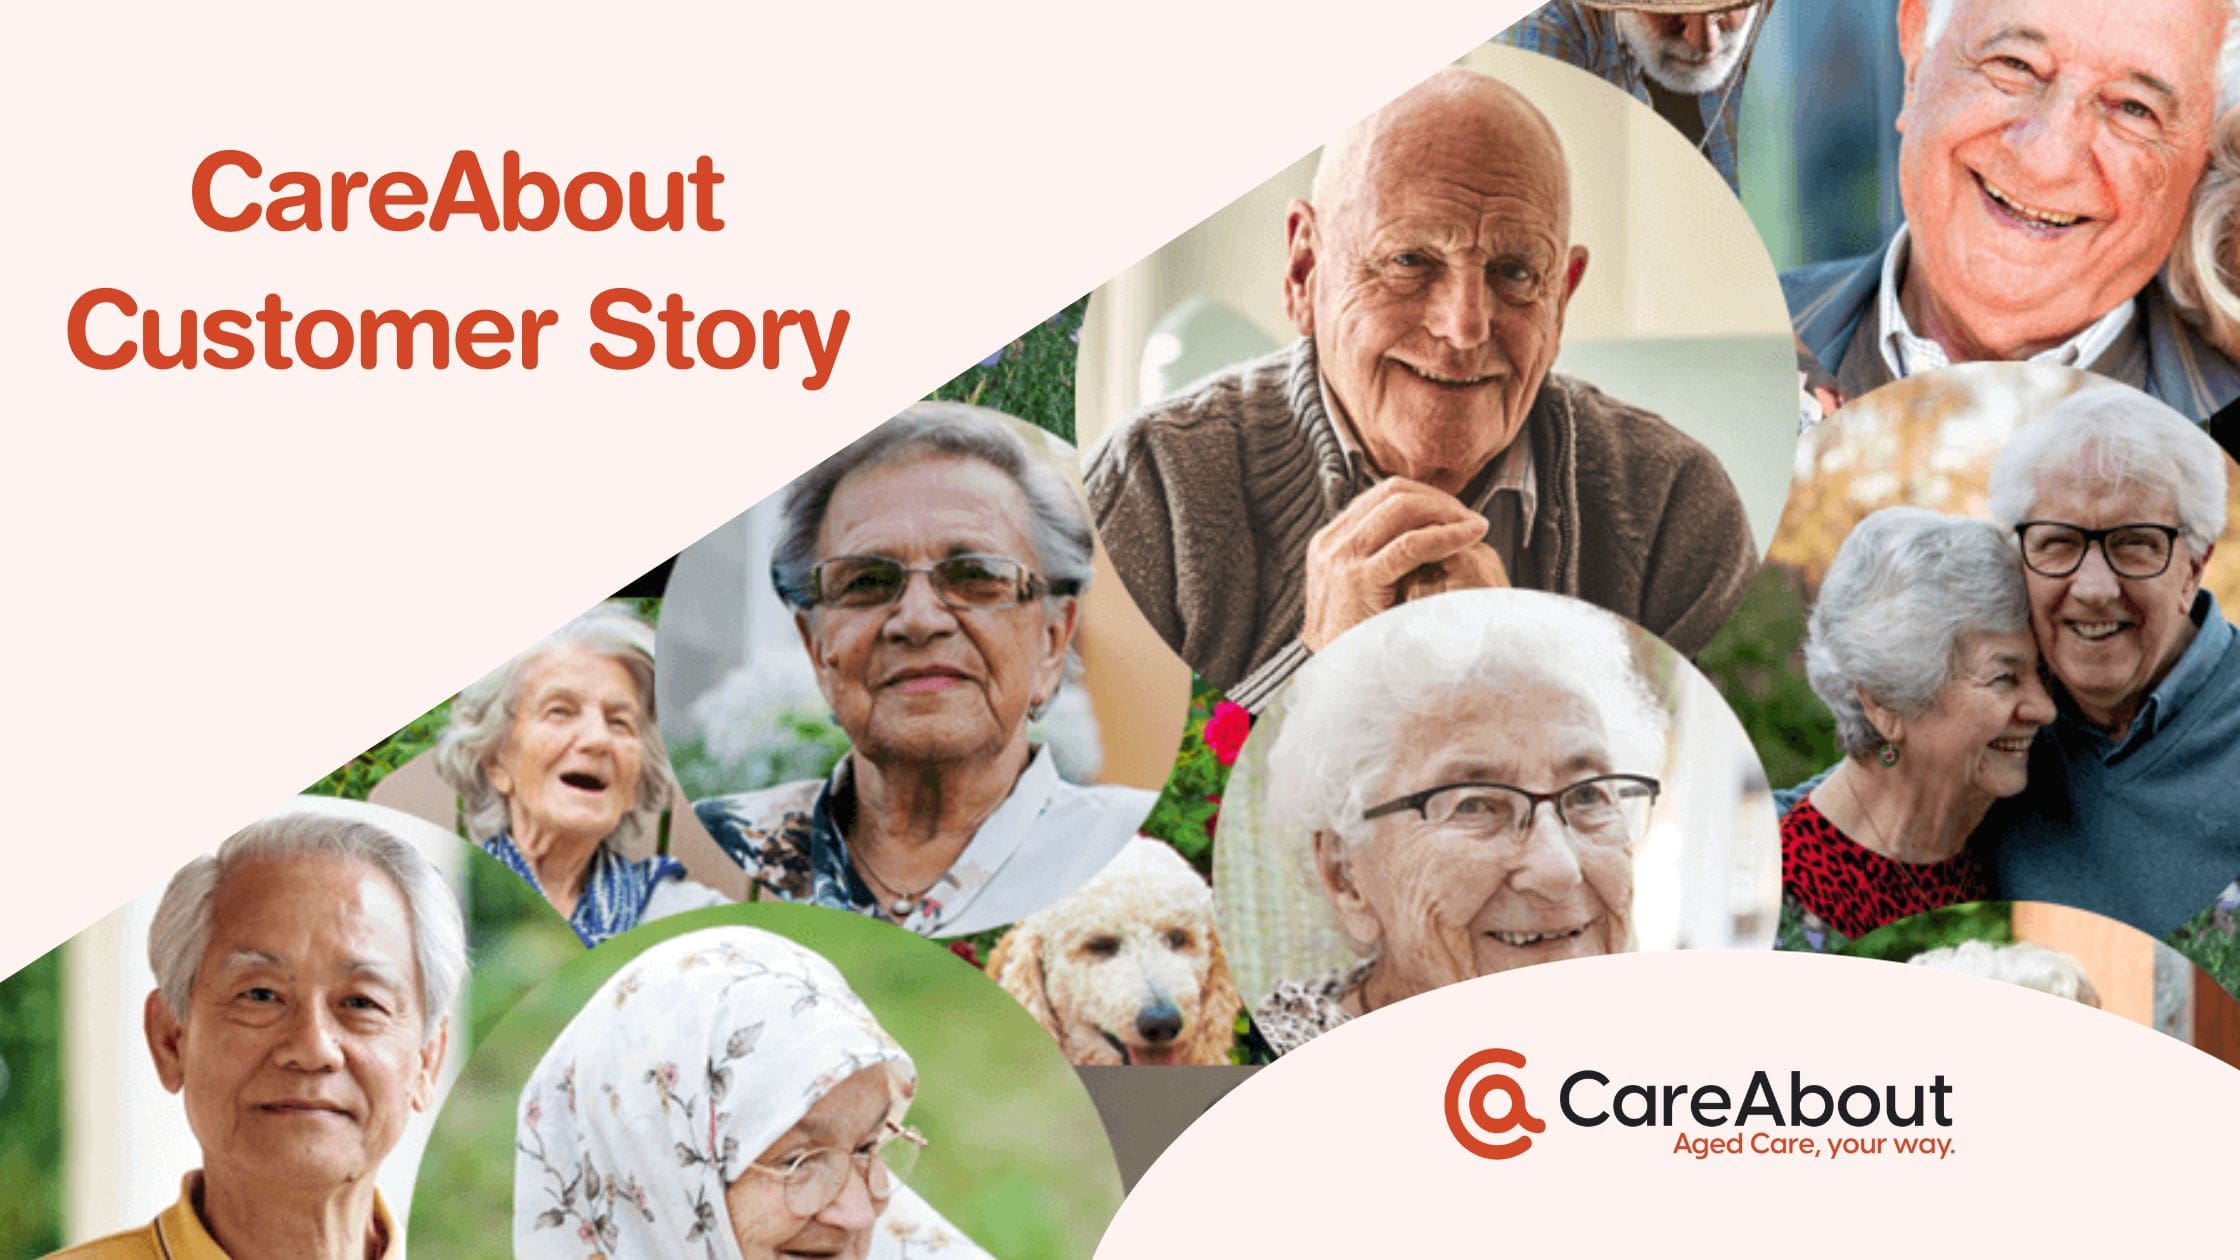 careabout customer story - aged care - home care - Nursing Home Placement service Australia